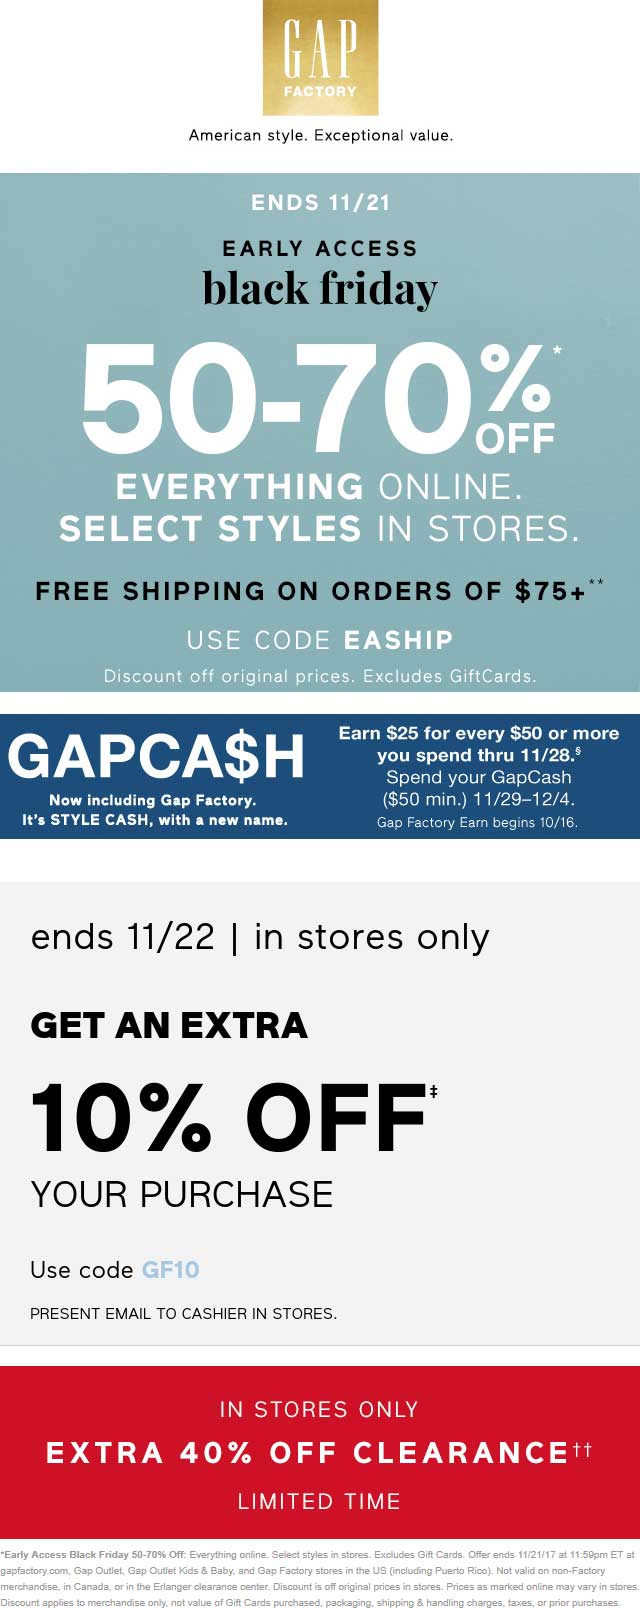 Gap Factory July 2021 Coupons and Promo Codes 🛒